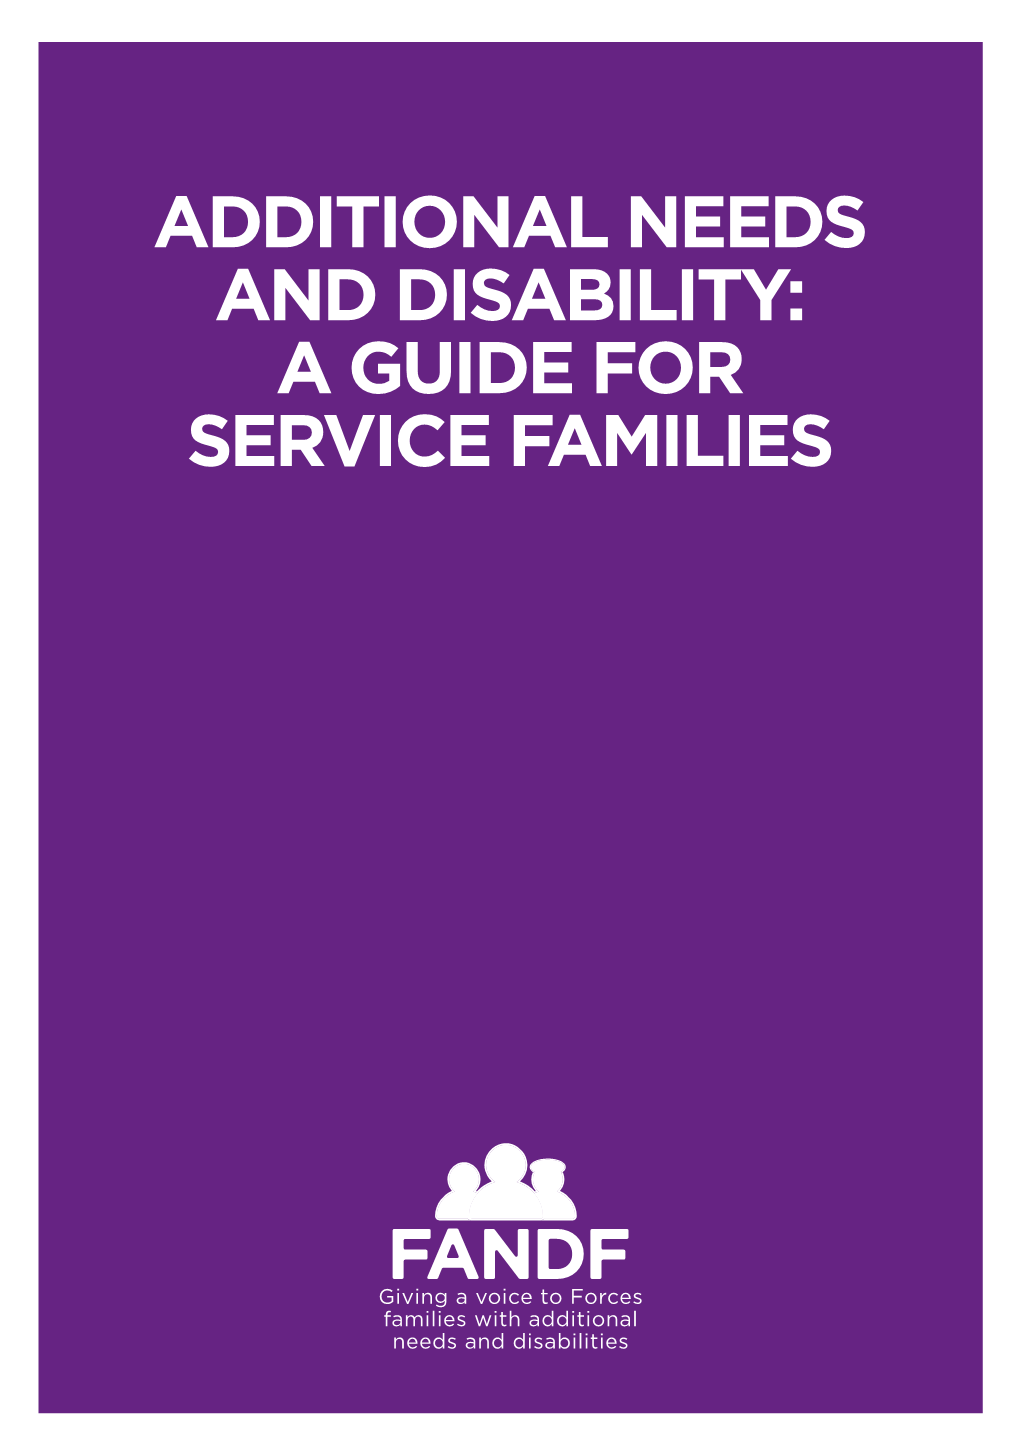 Additional Needs and Disability: a Guide for Service Families